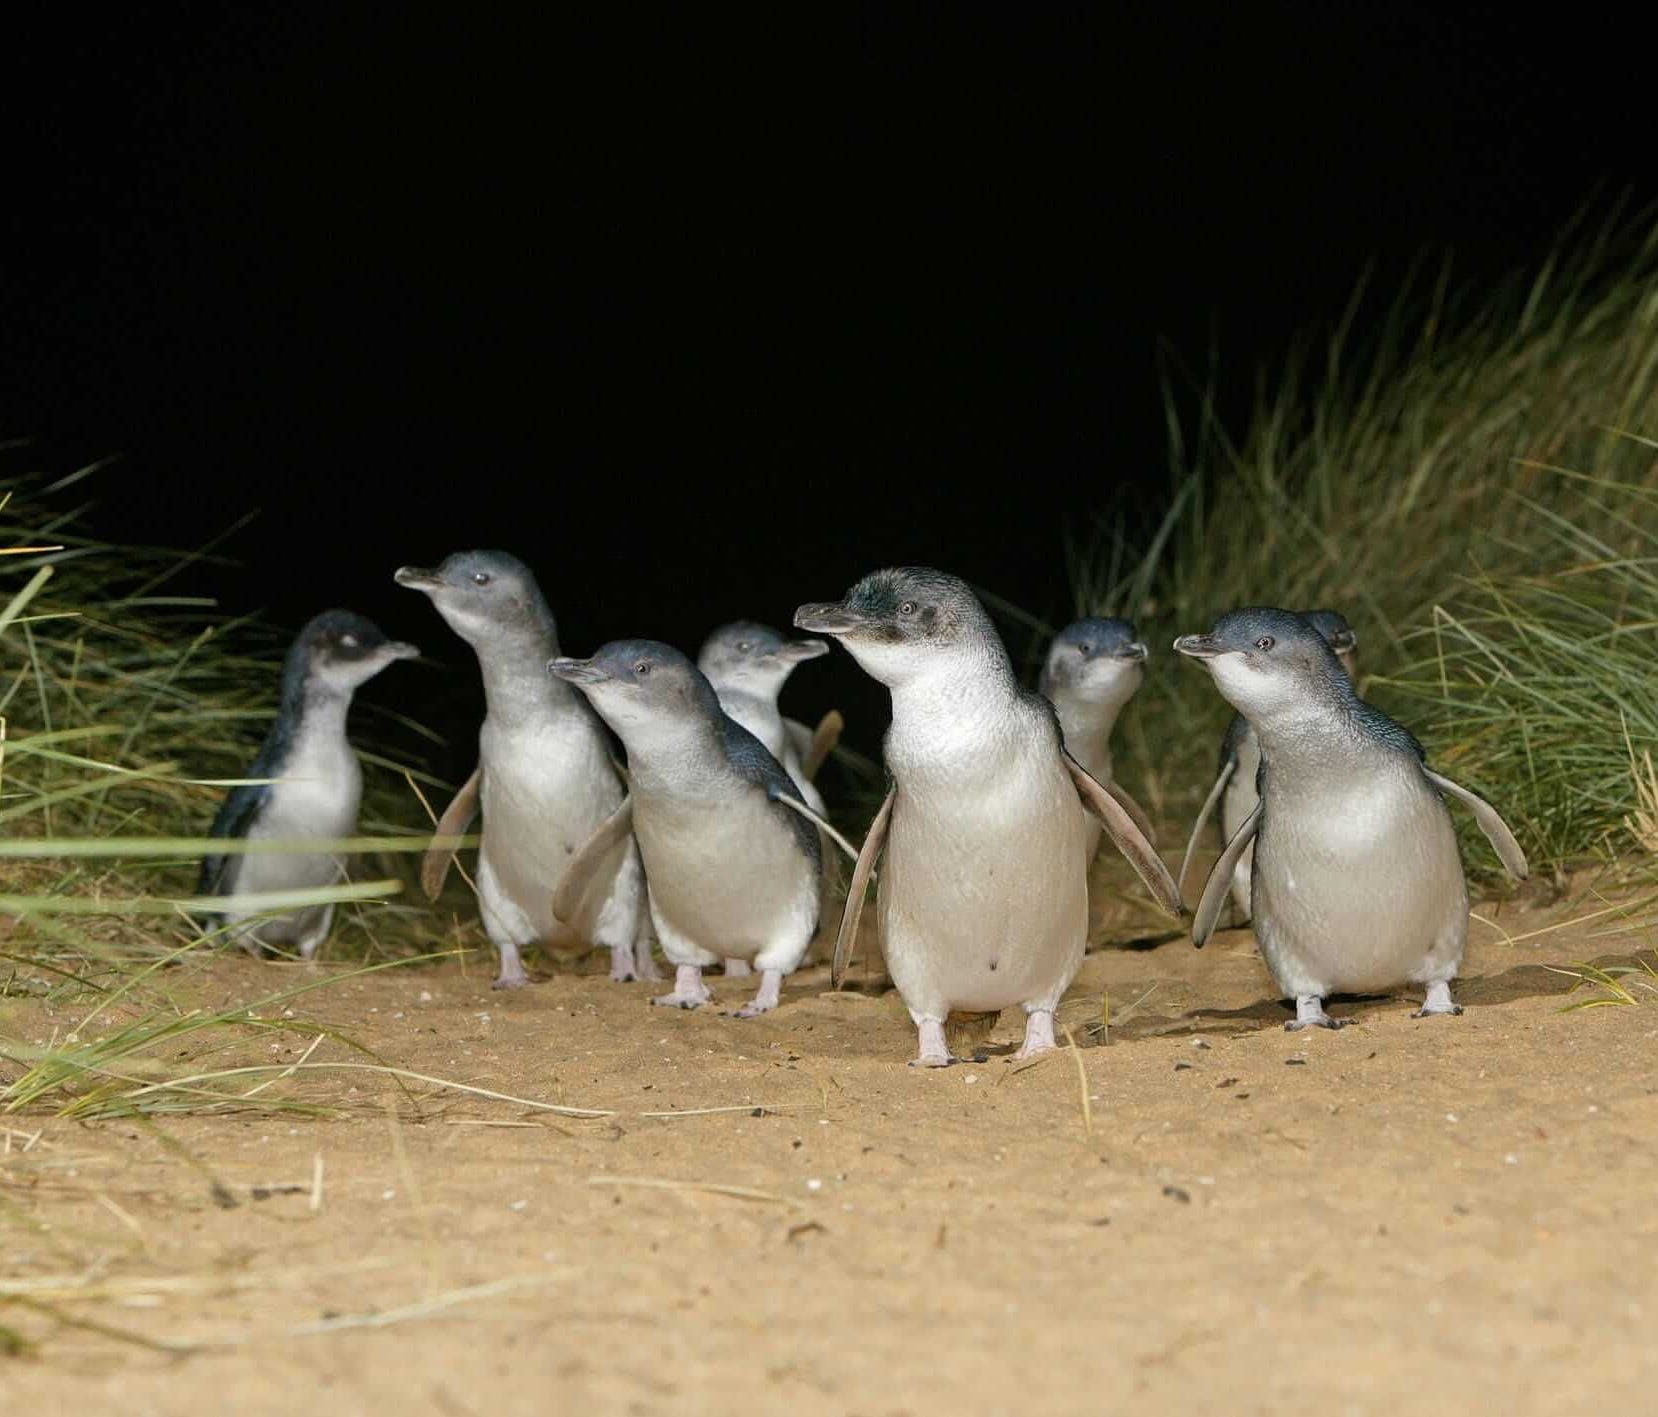 New Zealand is home to the world's smallest penguins.